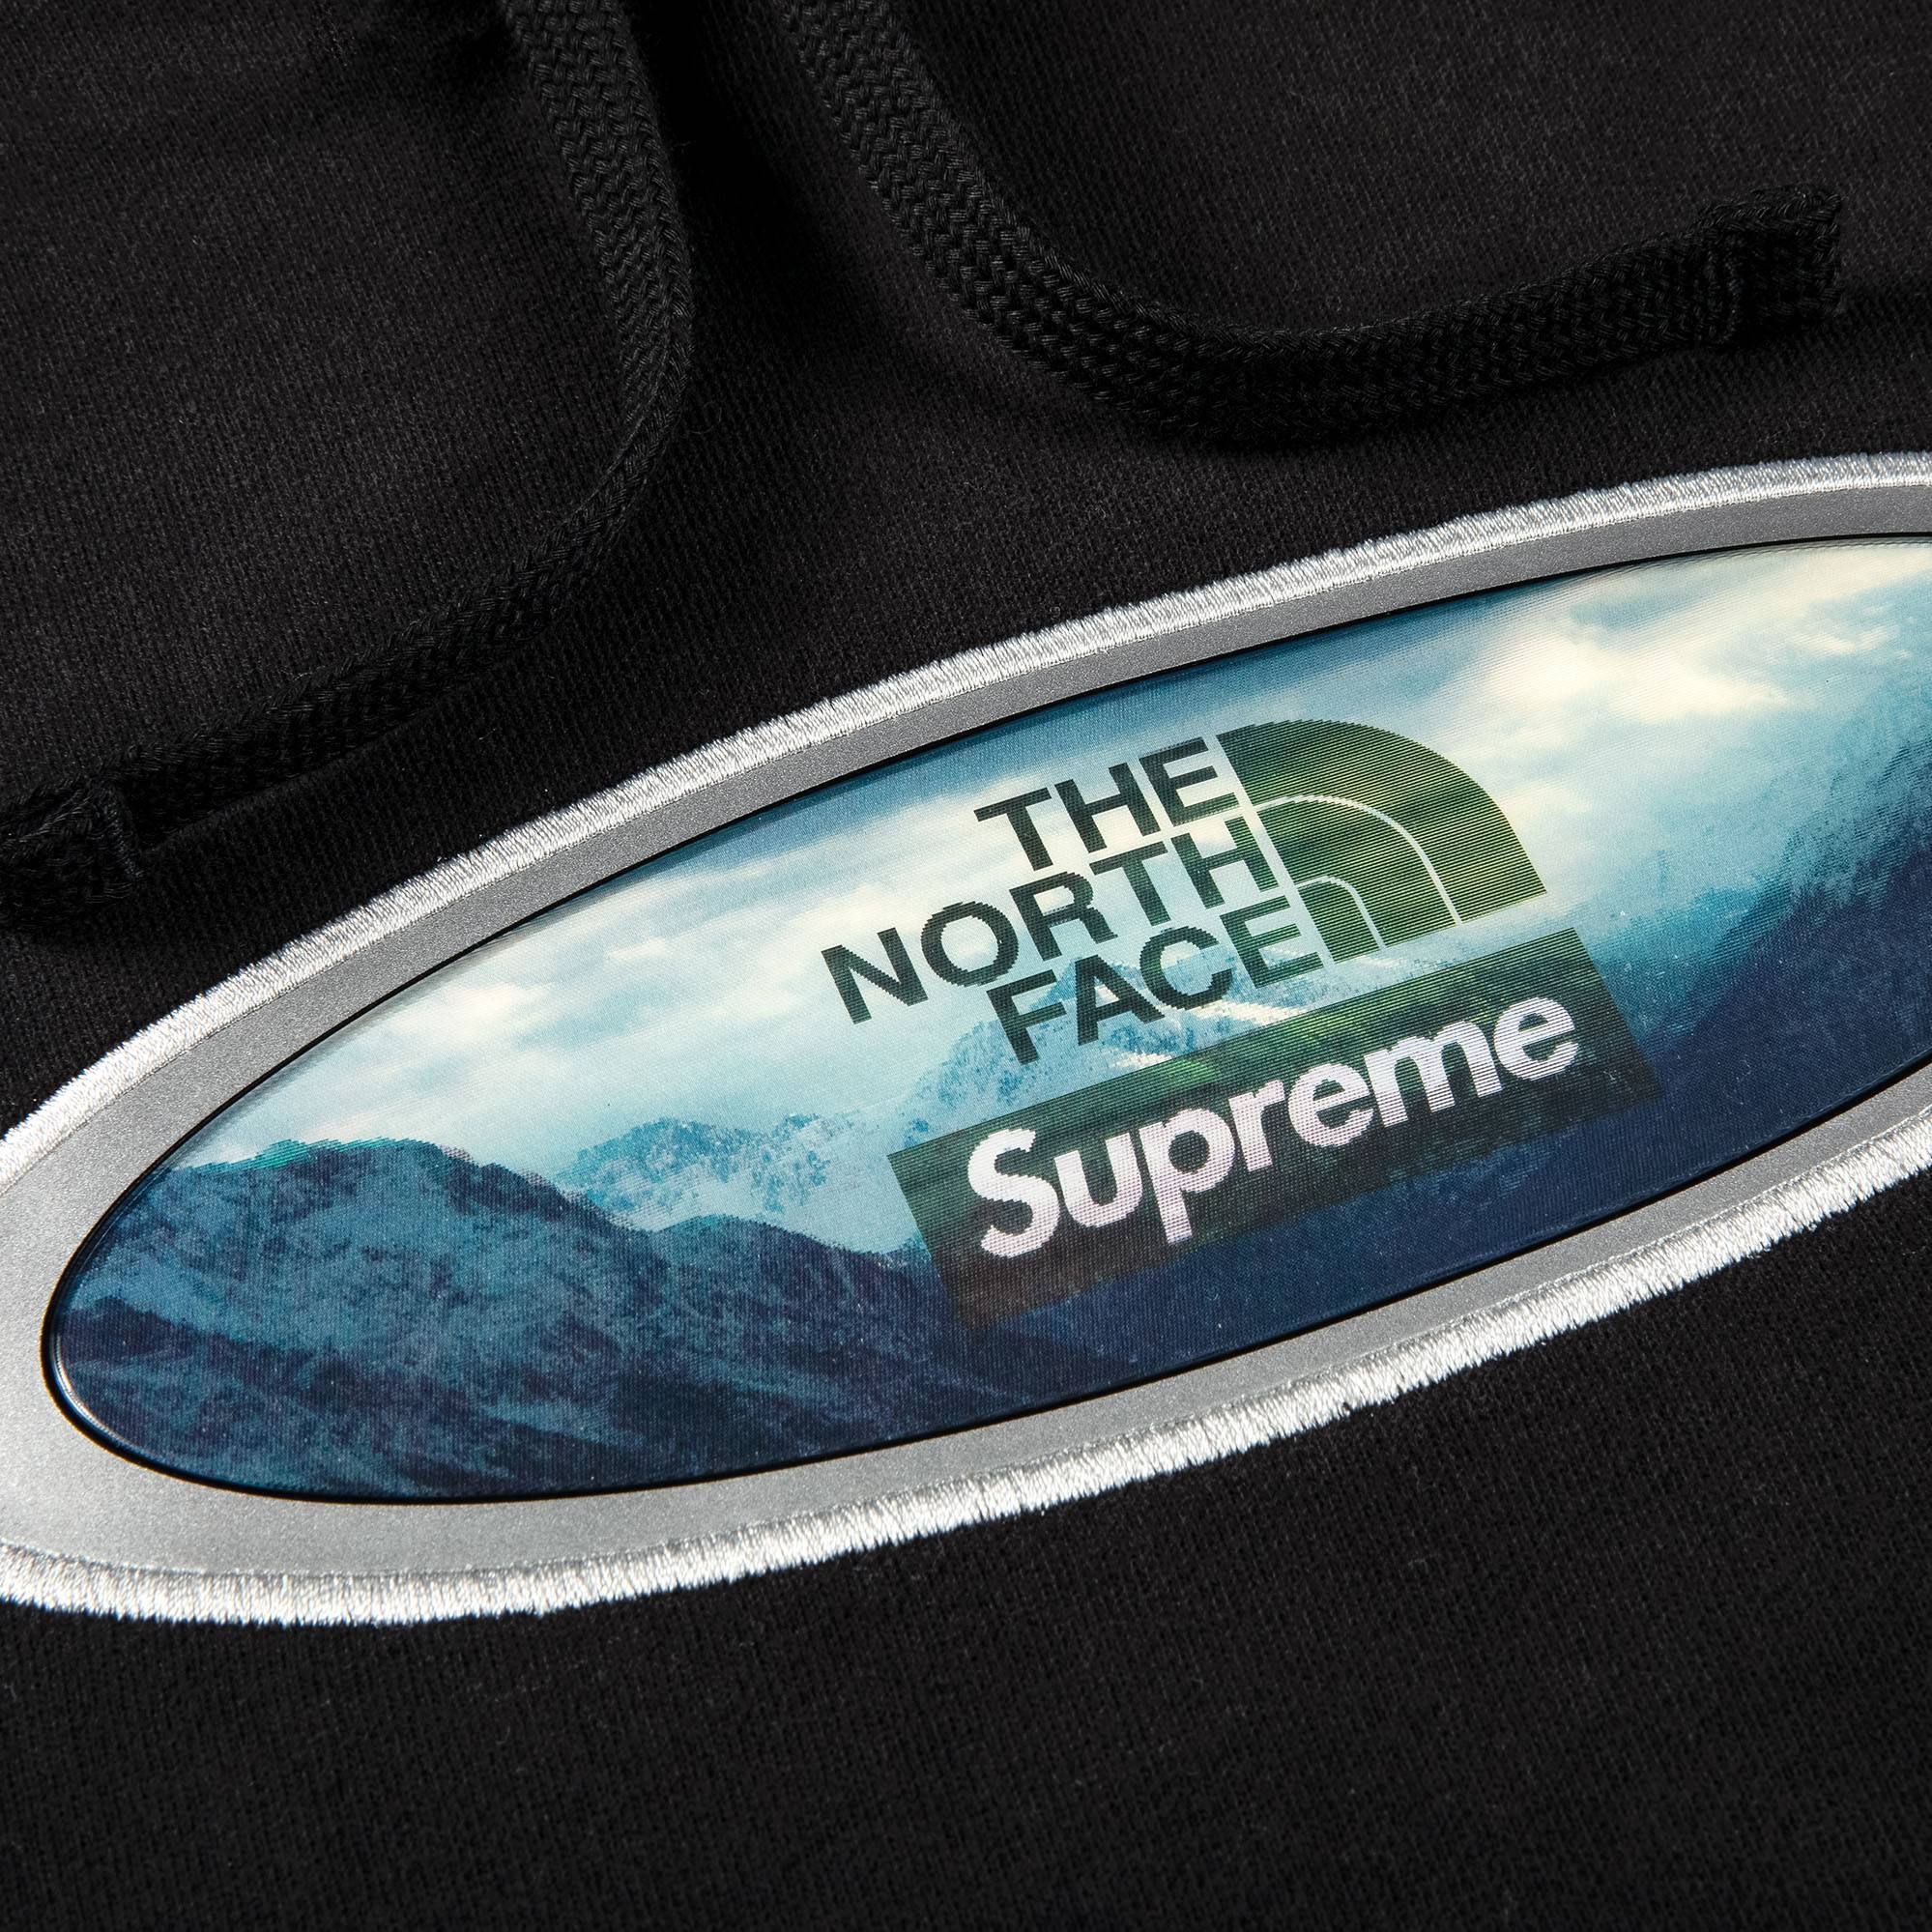 Supreme Supreme x The North Face Lenticular Mountains Hooded